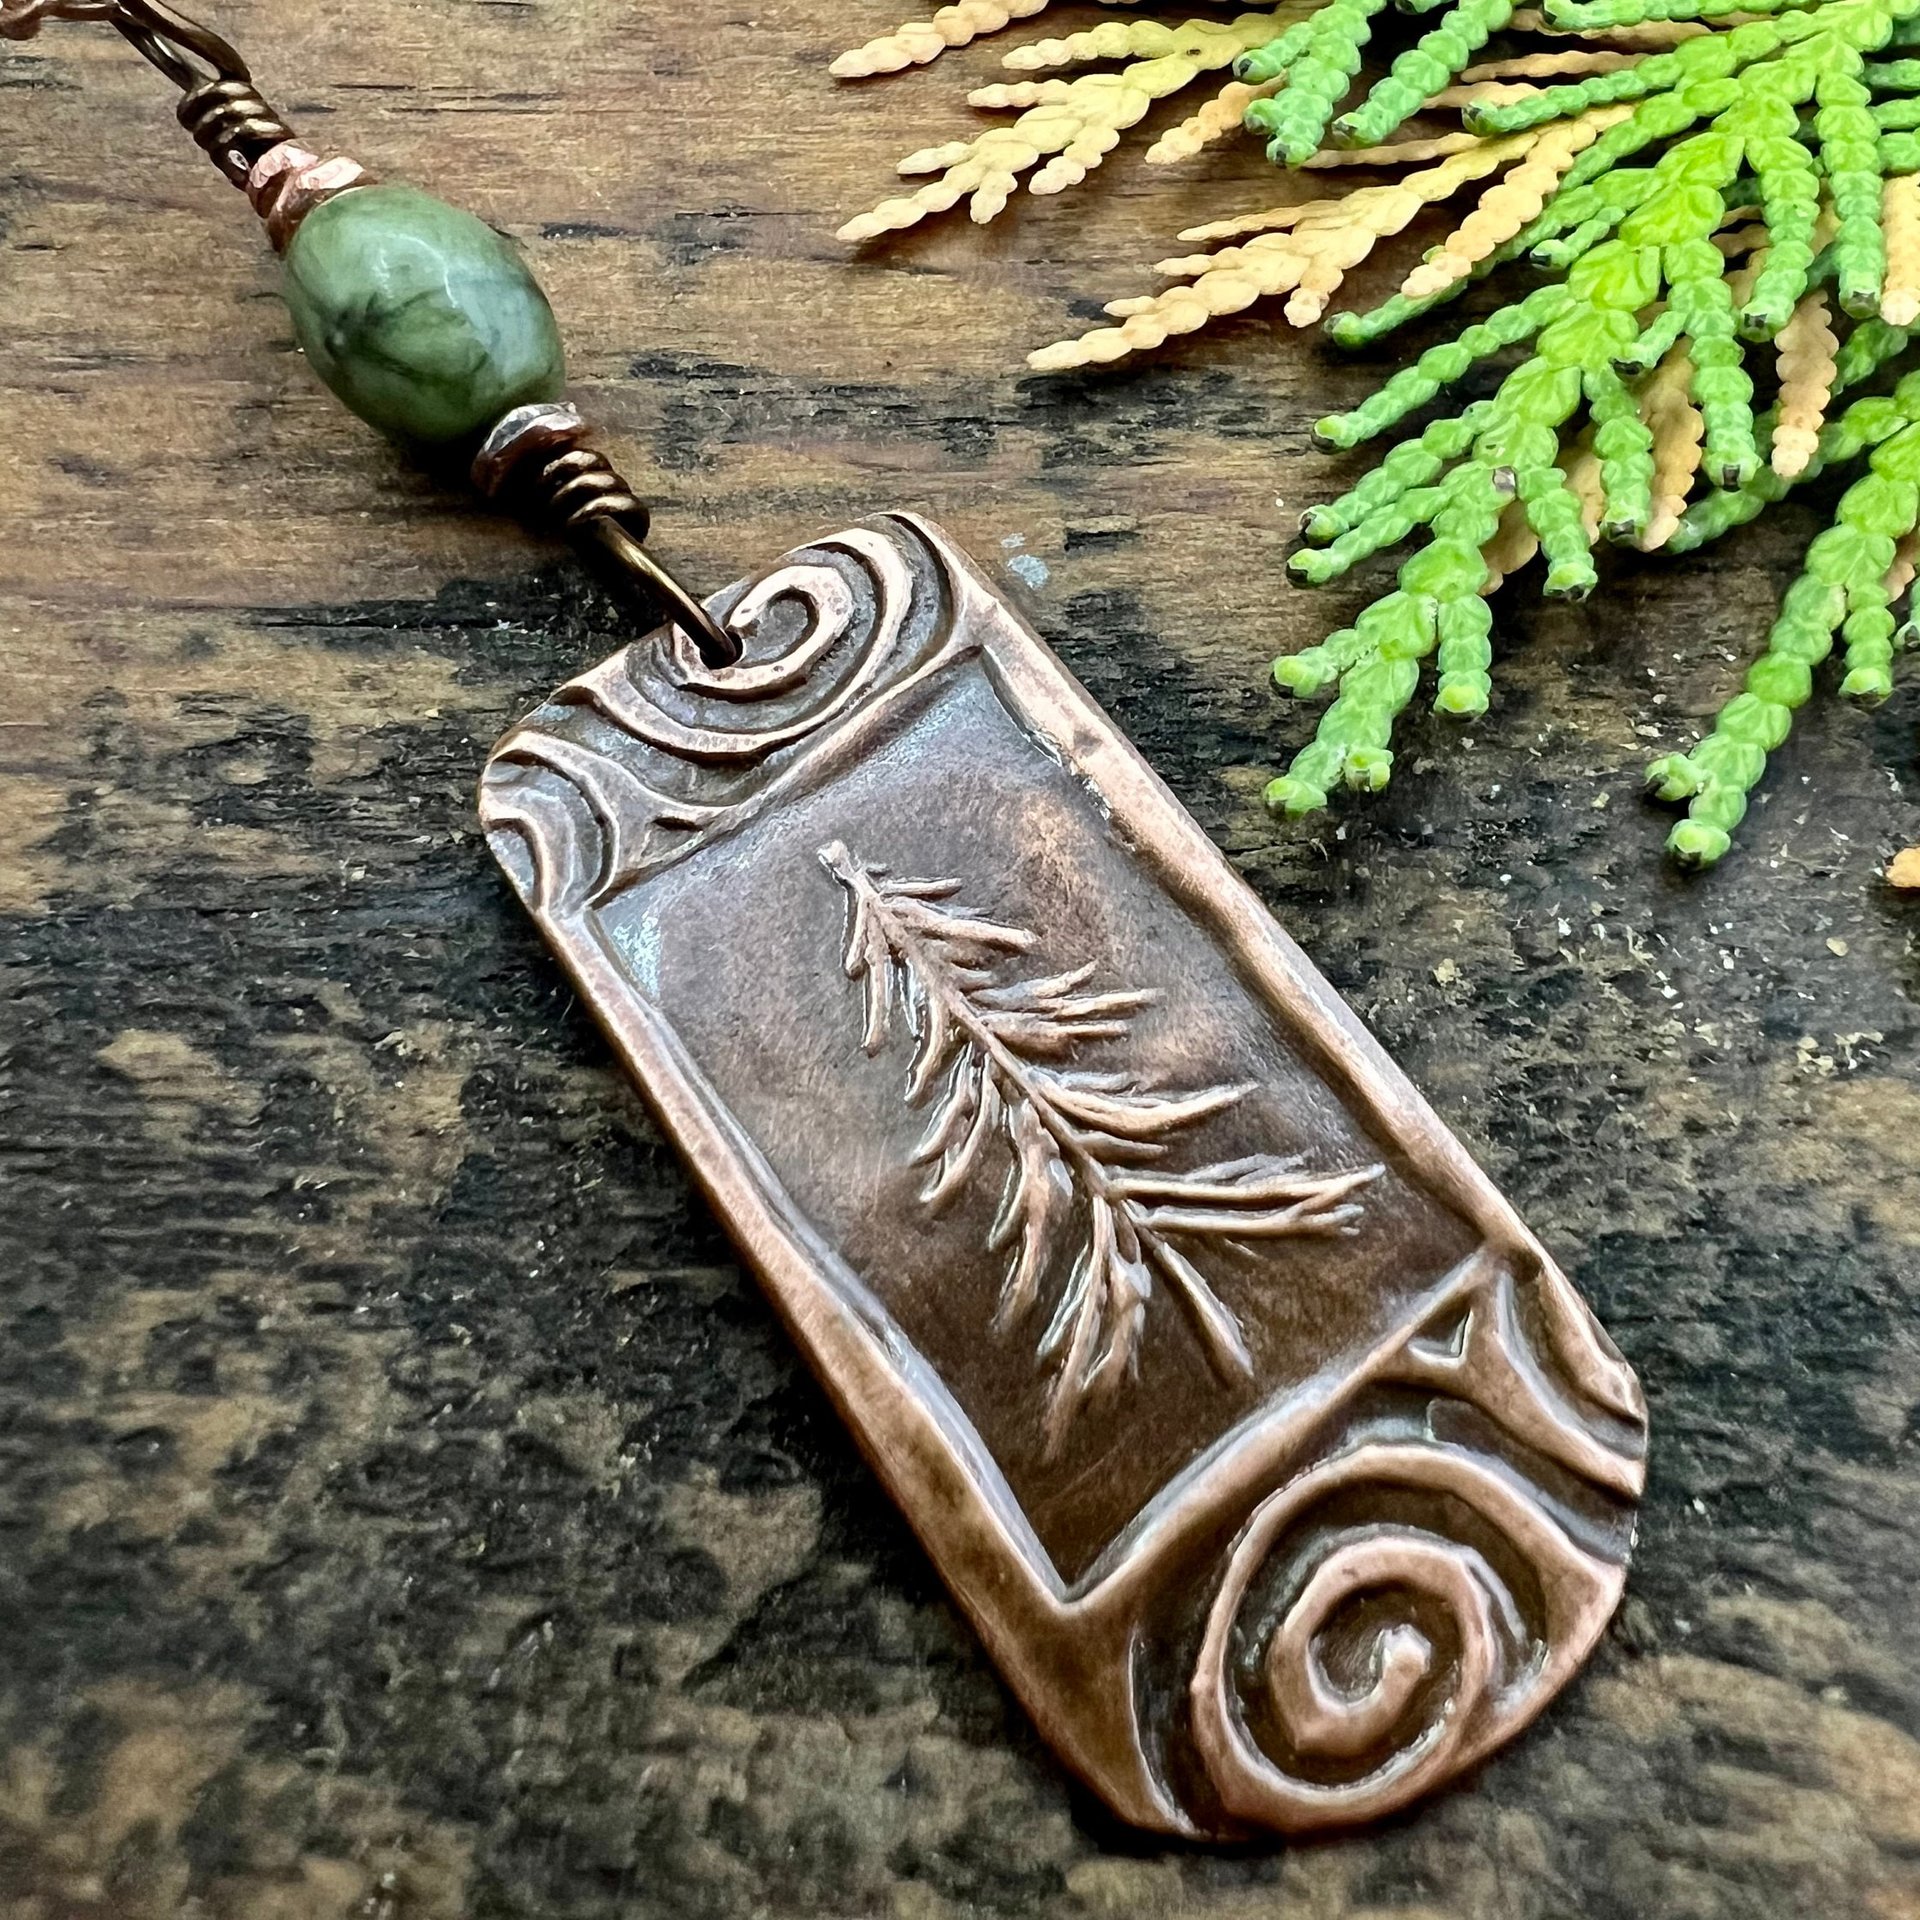 Pine Tree, Copper Pendant, Celtic Spirals, Connemara Marble, Evergreen Trees, Earthy Rustic Art Jewelry, Hand Carved, Tree of Life, Pagan